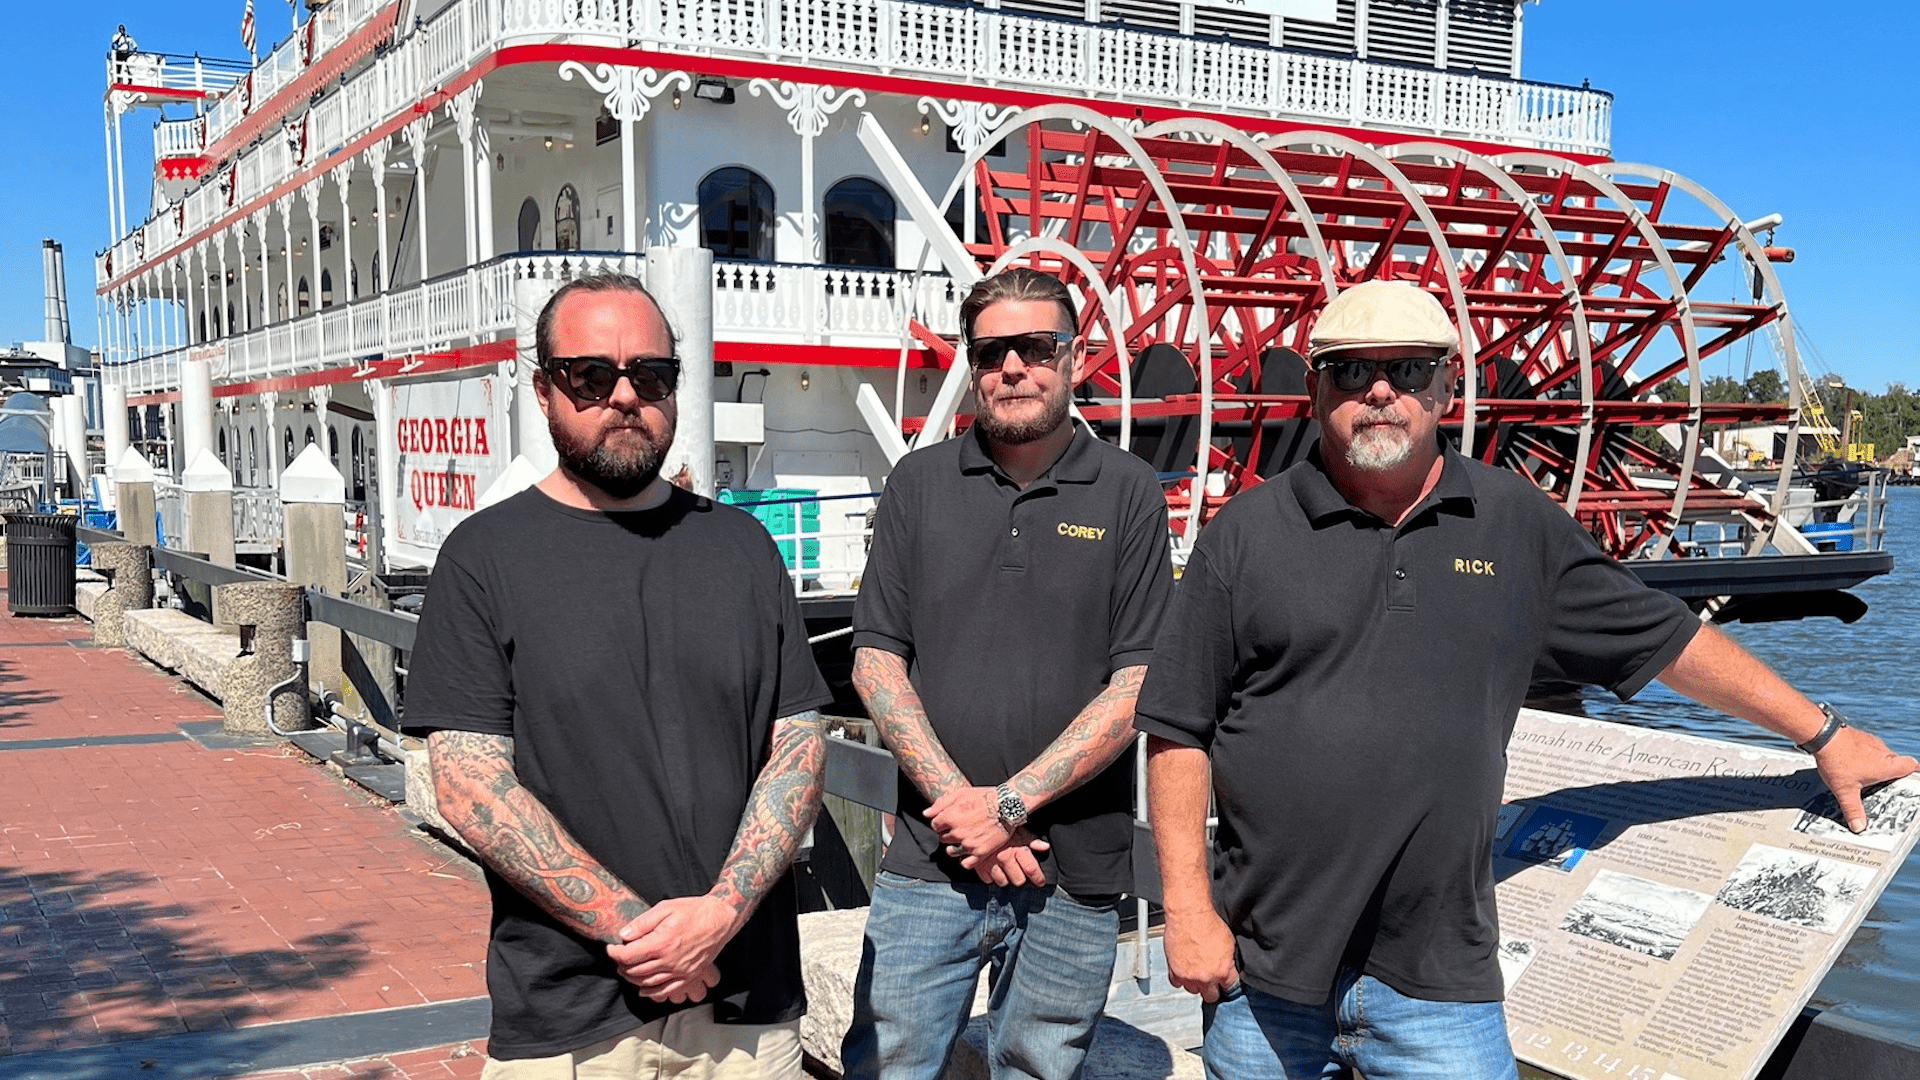 Show 'Pawn Stars' to film in Tampa Bay area this April